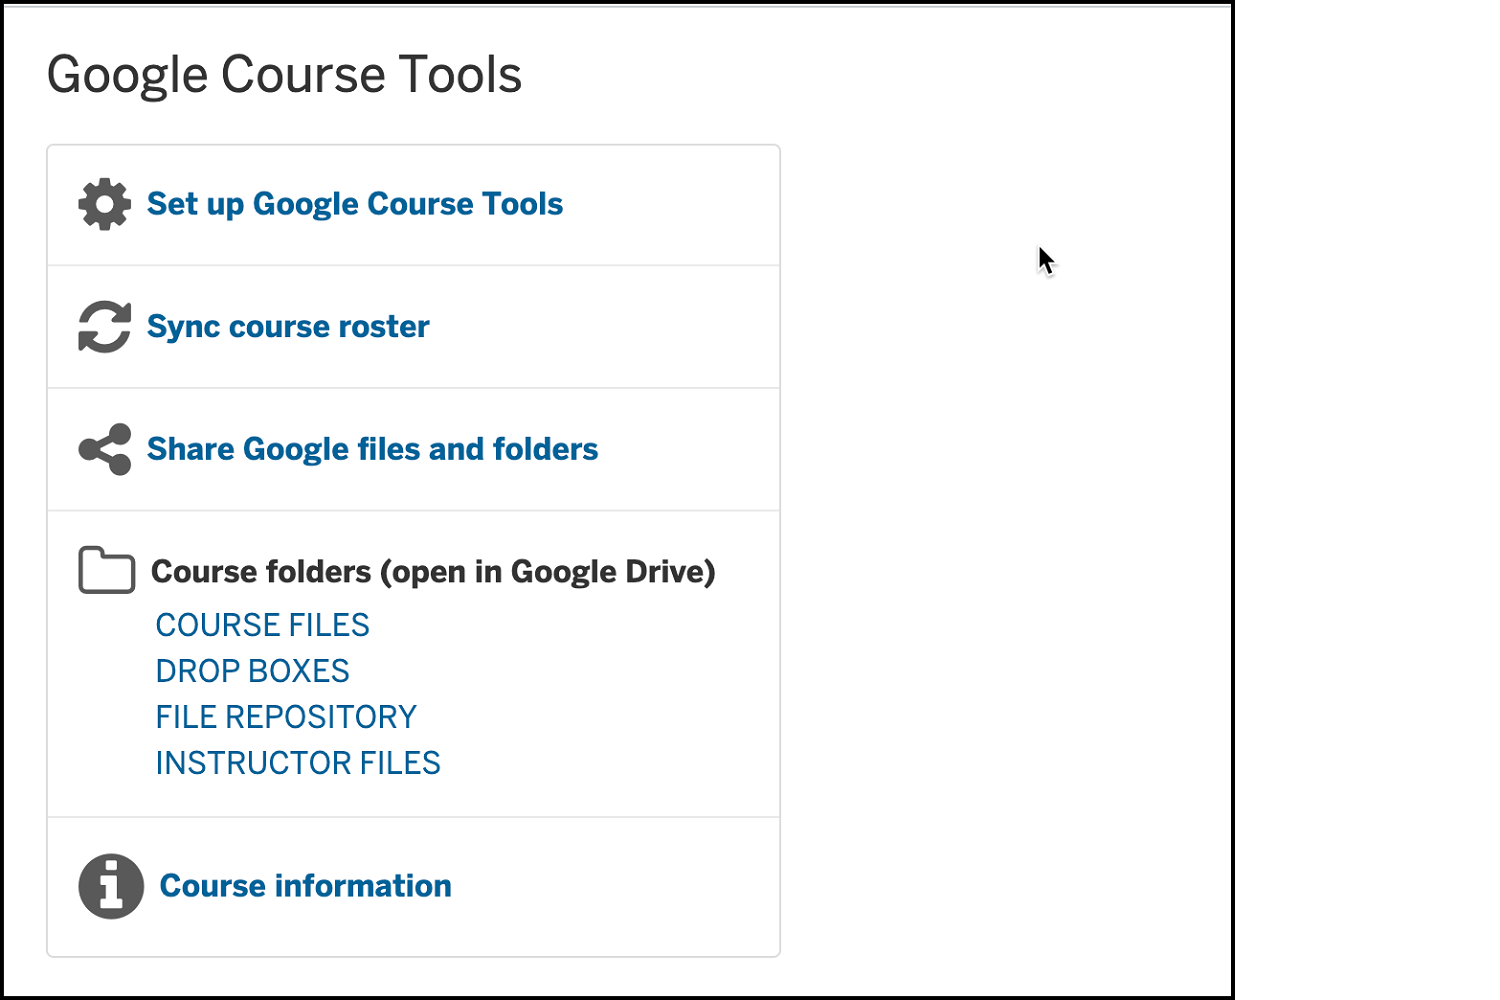 Image of instructor view of the main menu for Google Course Tools.